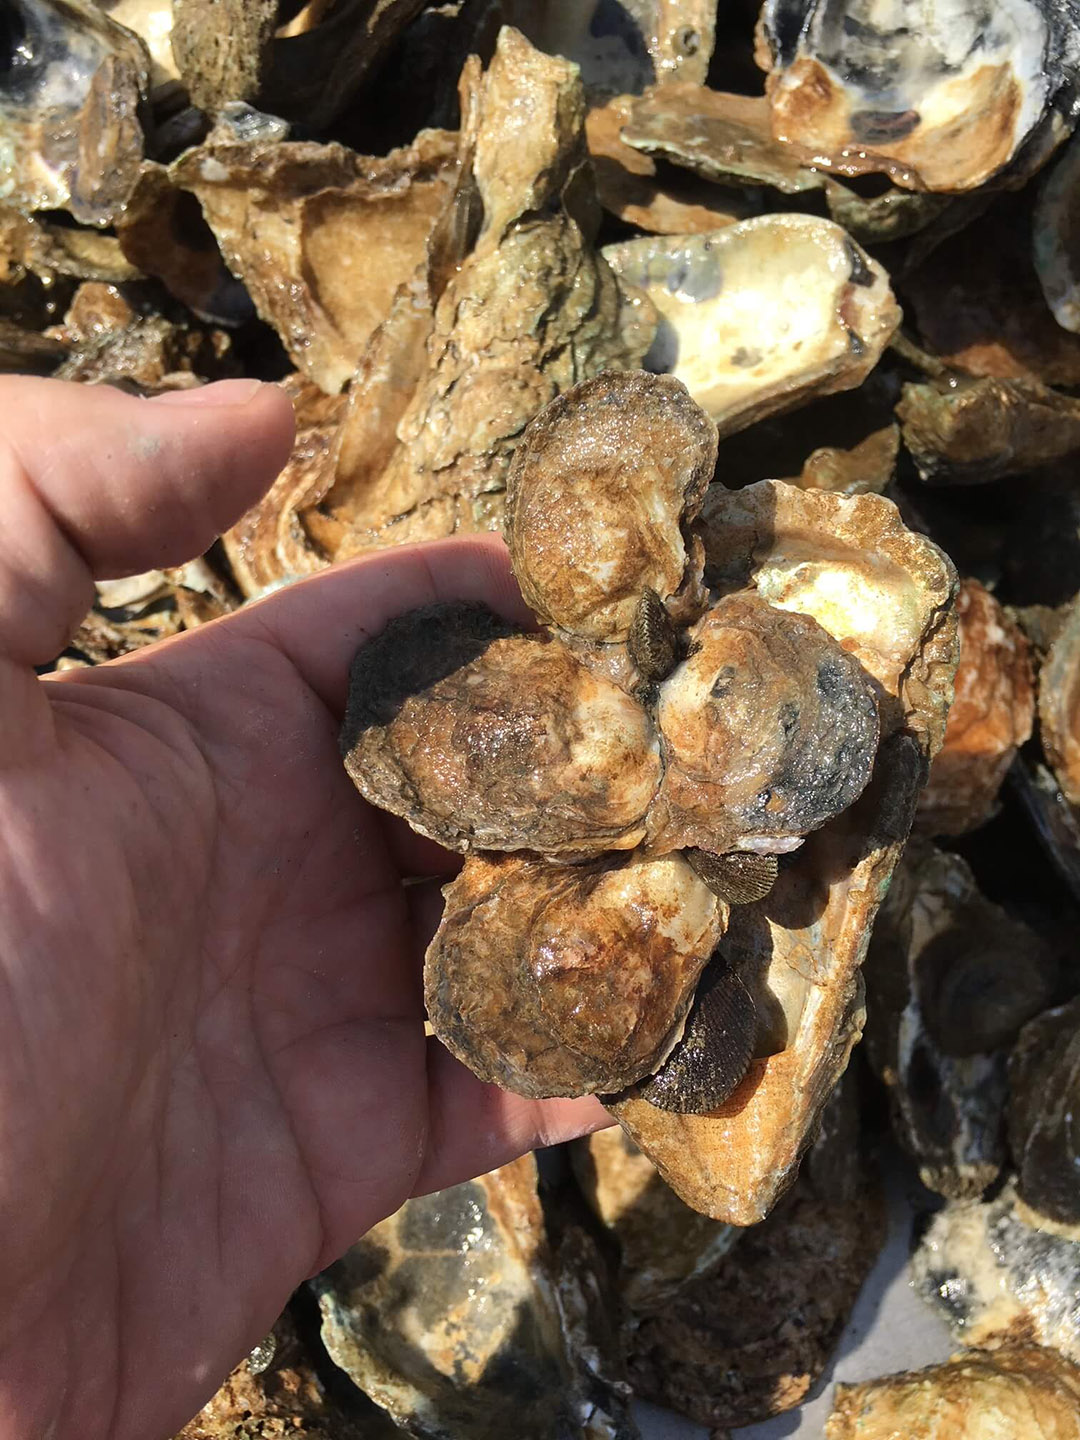 Importance of Oysters